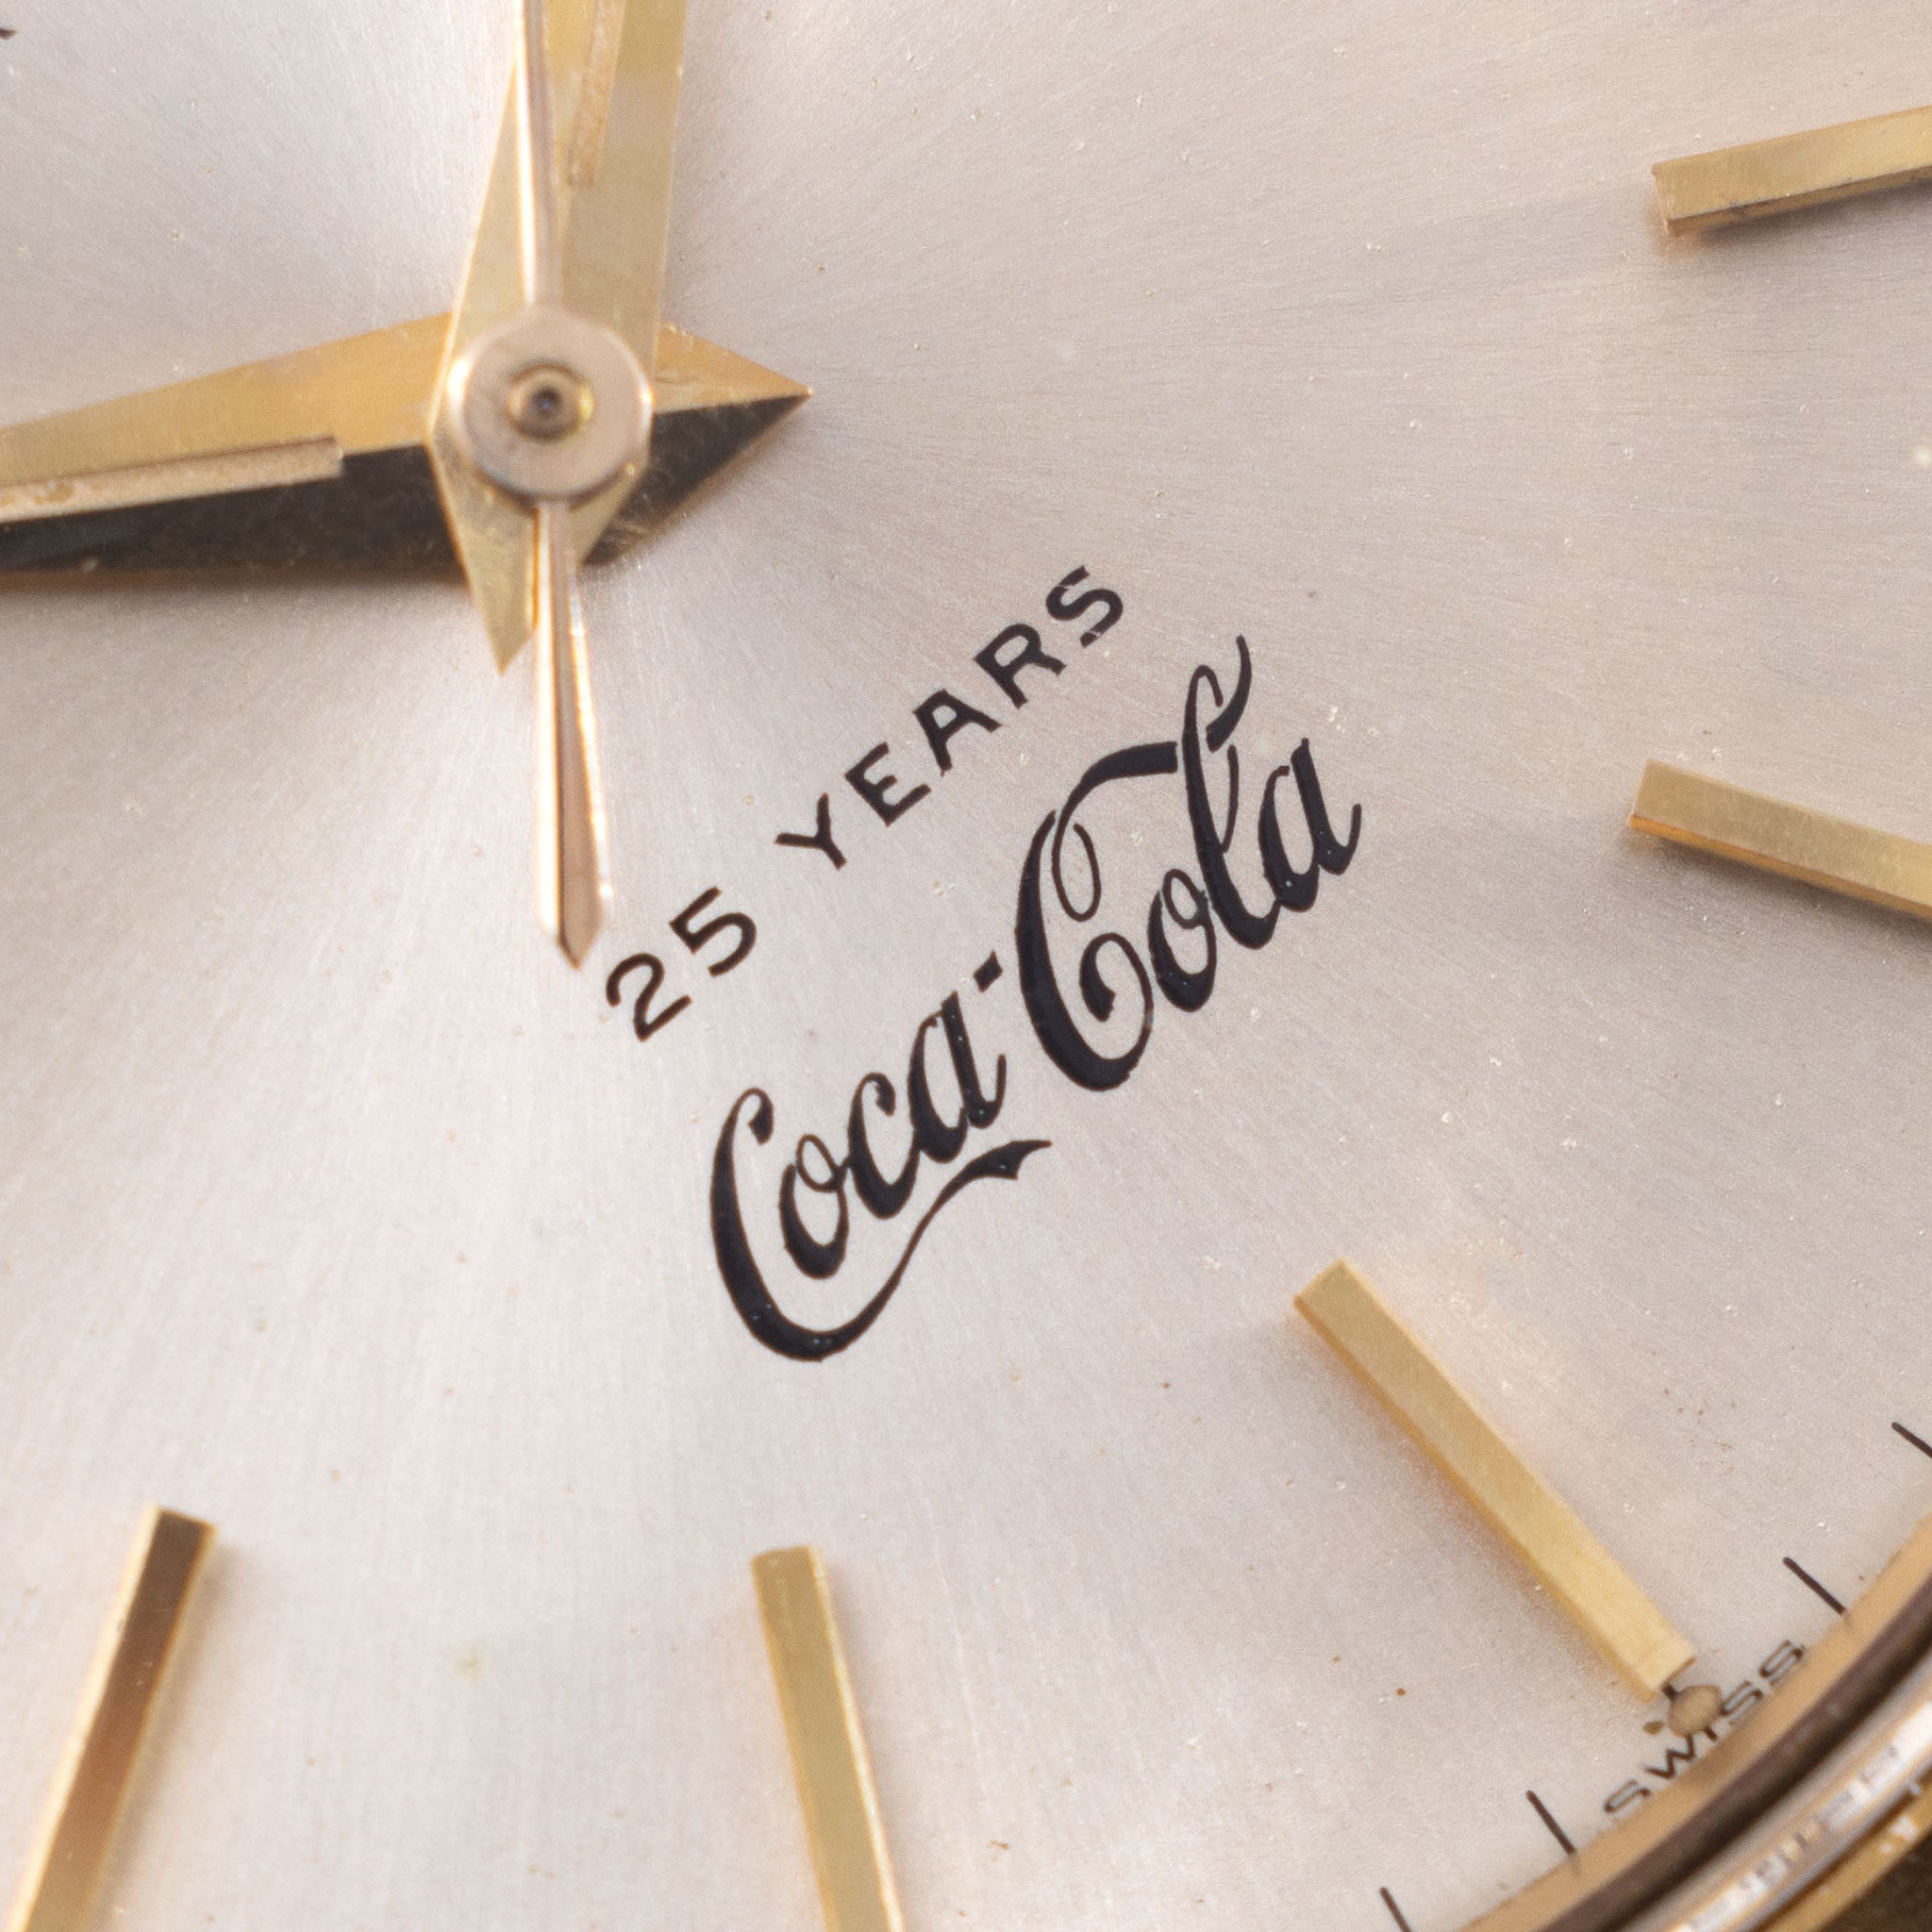 Rolex Oyster Perpetual Ref. 1002 ‘Coca Cola 25 Years’ Dial in 14K Yellow Gold